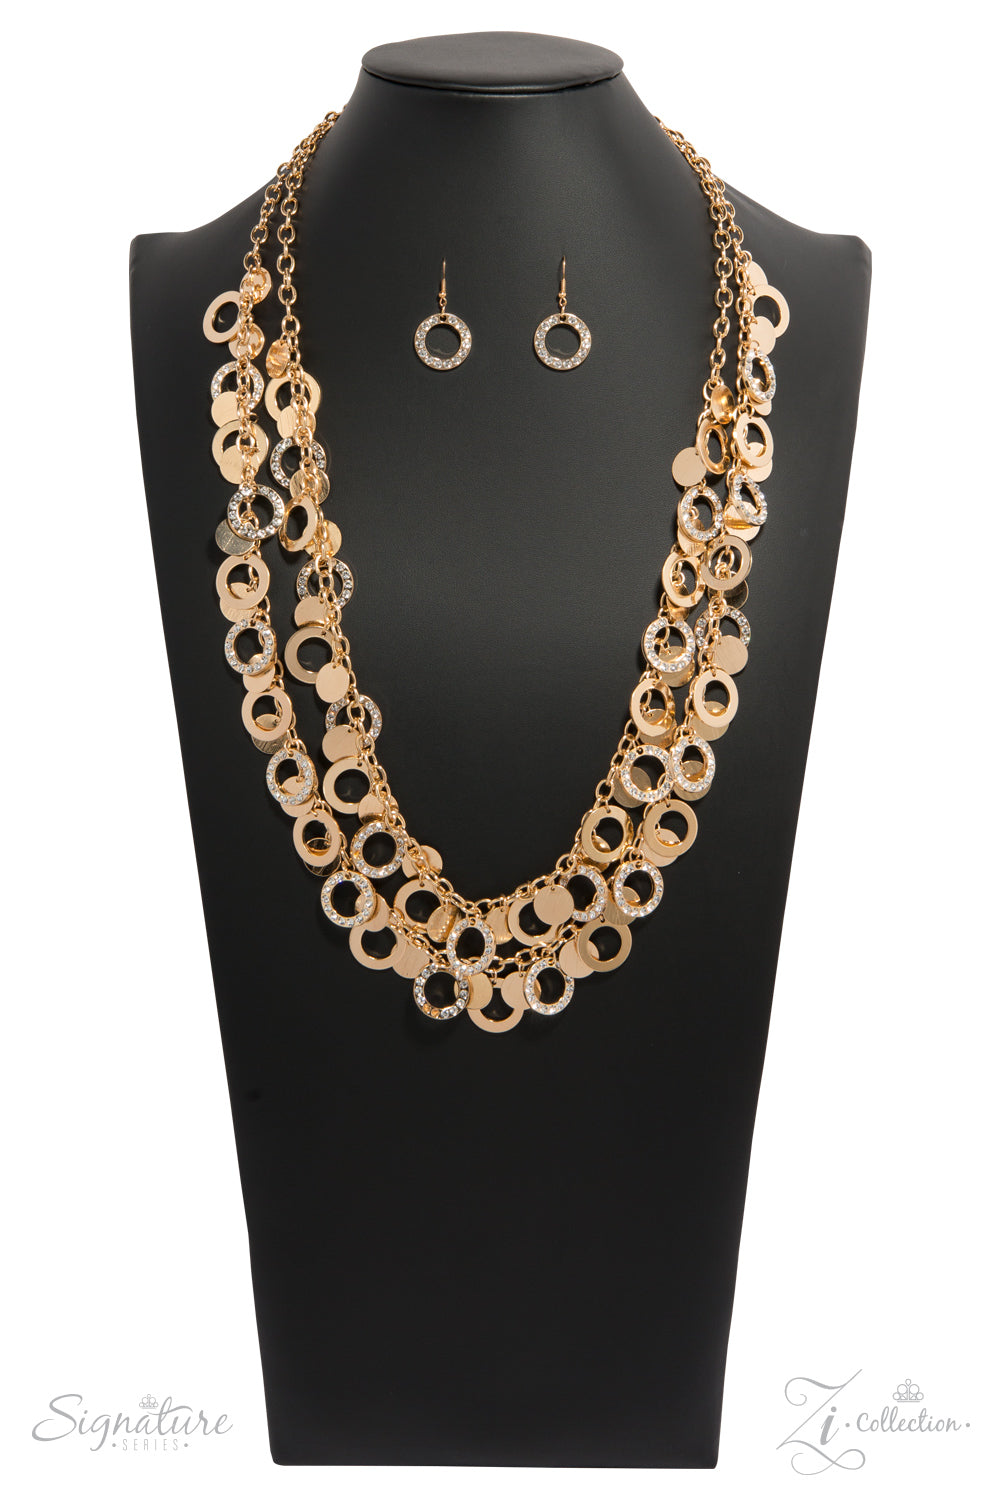 Signature Zi Collection The Carolyn - Paparazzi Necklace - Be Adored Jewelry